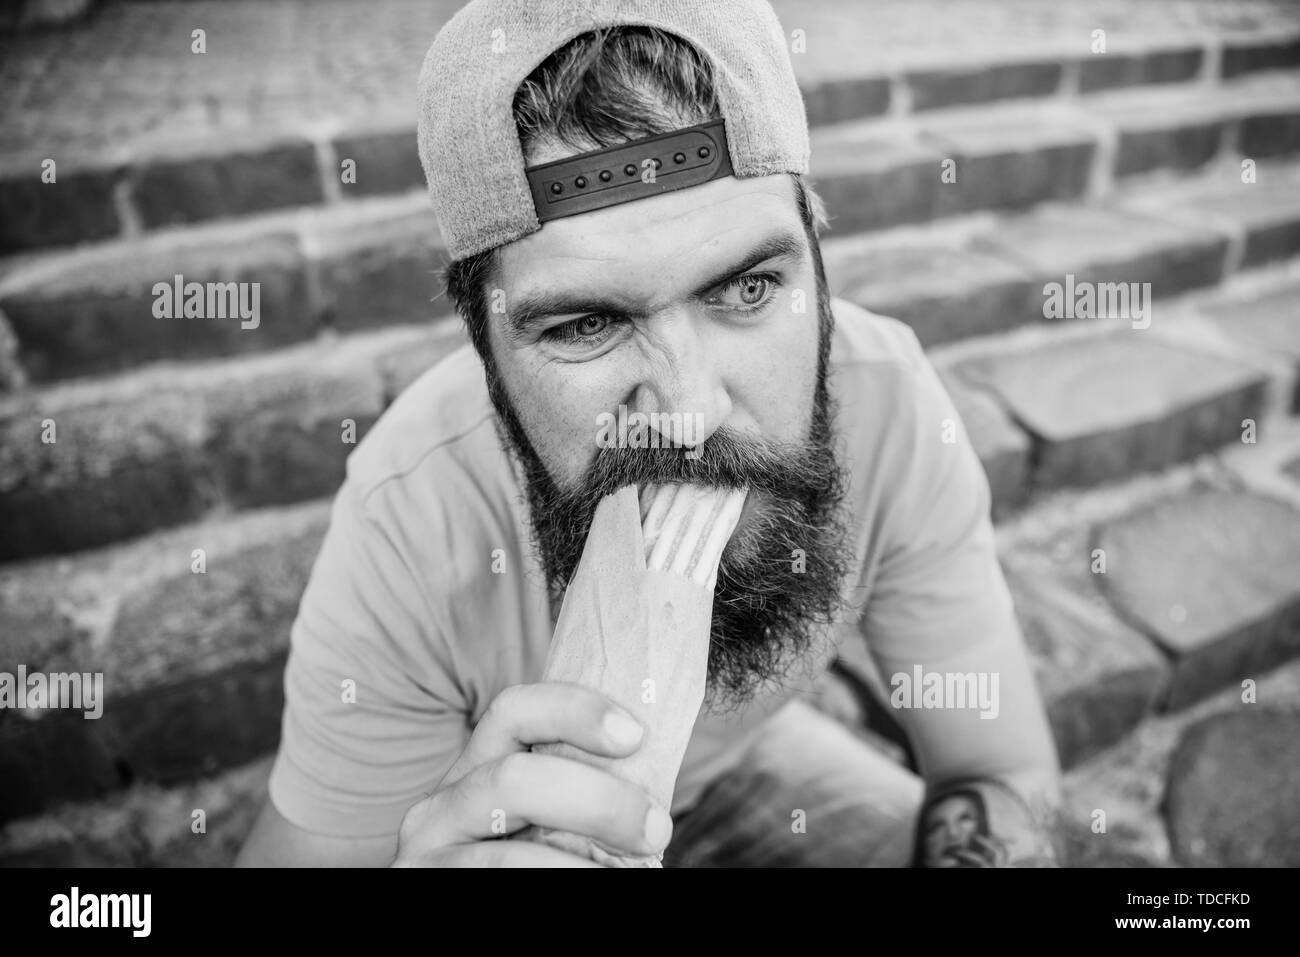 Junk food. Carefree hipster eat junk food while sit stairs. Guy eating hot dog. Snack for good mood. Unleashed appetite. Street food concept. Man bearded eat tasty sausage. Urban lifestyle nutrition. Stock Photo